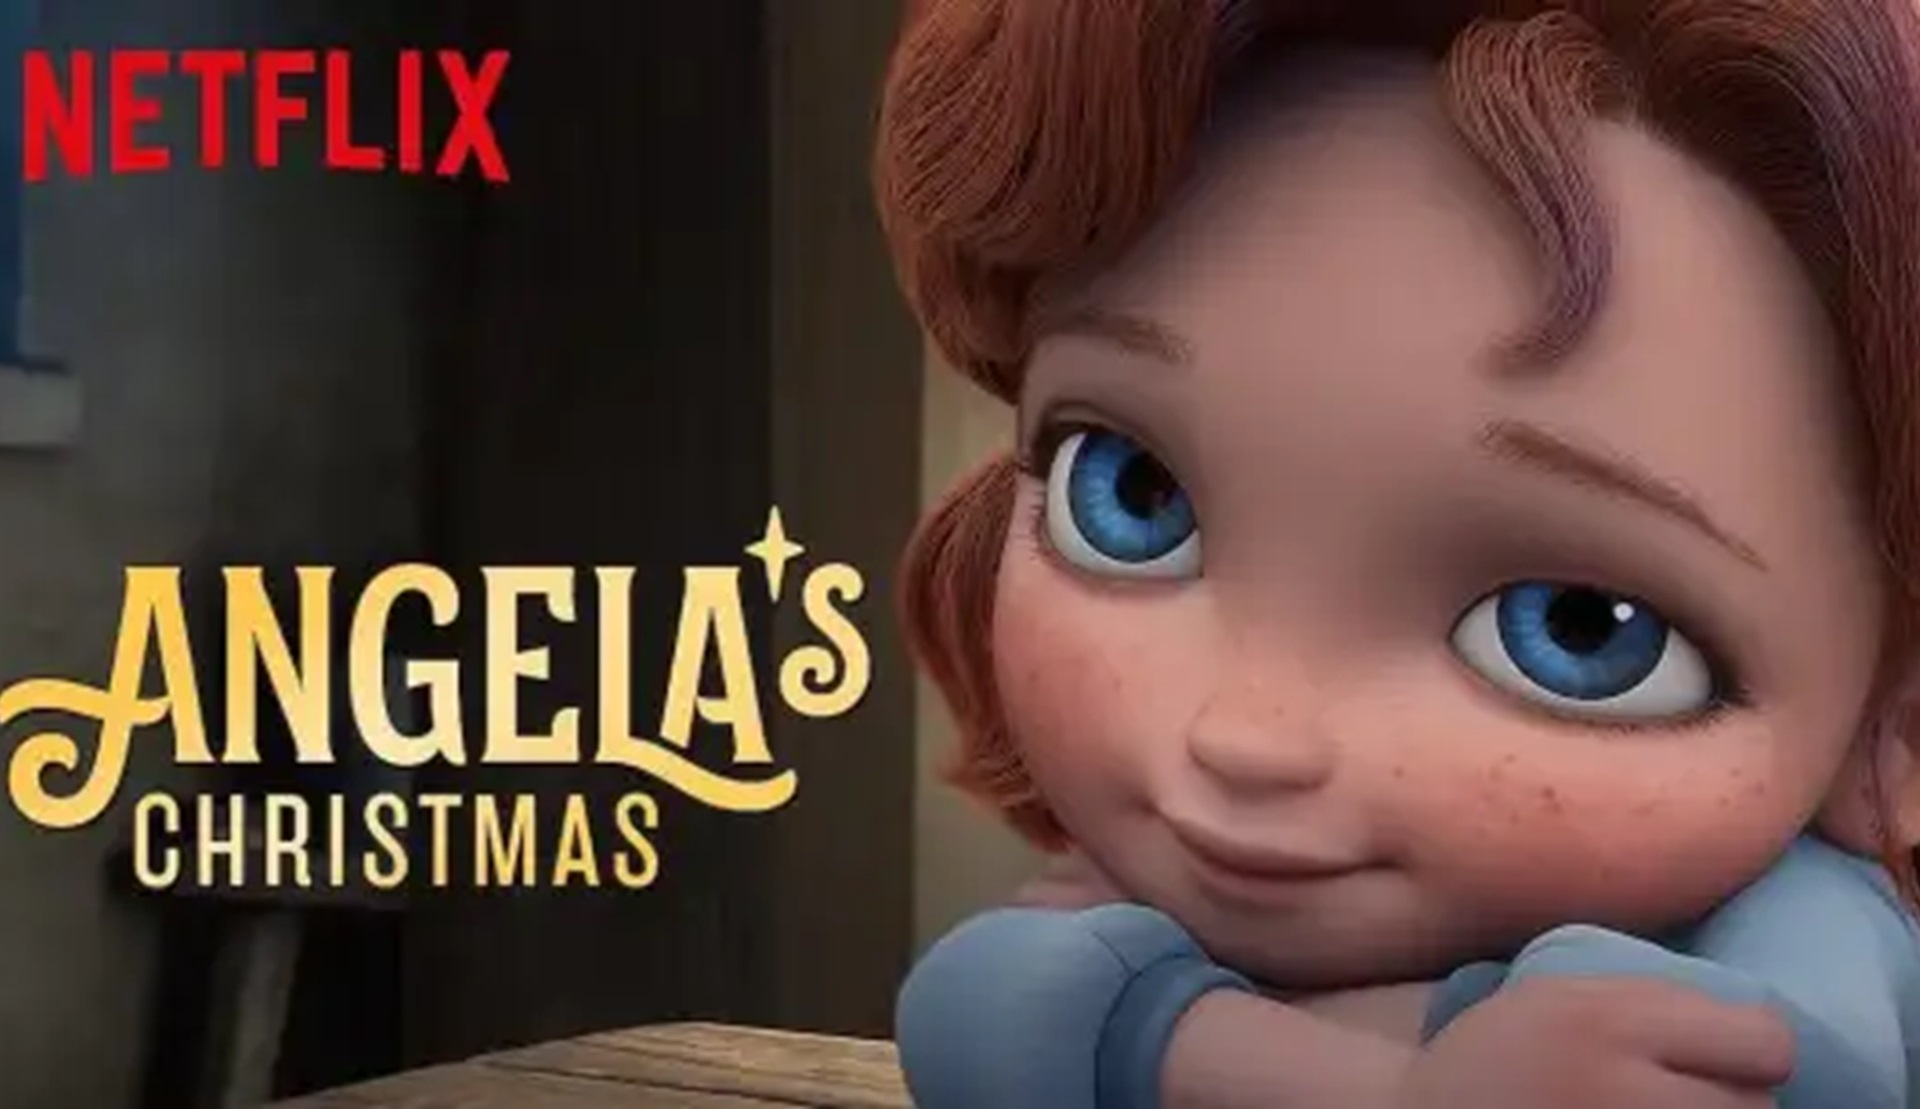 <p>This Irish film tells a sad yet heartwarming tale of a little girl named Angela, based on the work of Irish author  Frank McCourt. Children will learn the importance of being generous even if they face difficult circumstances and have little to give.</p>